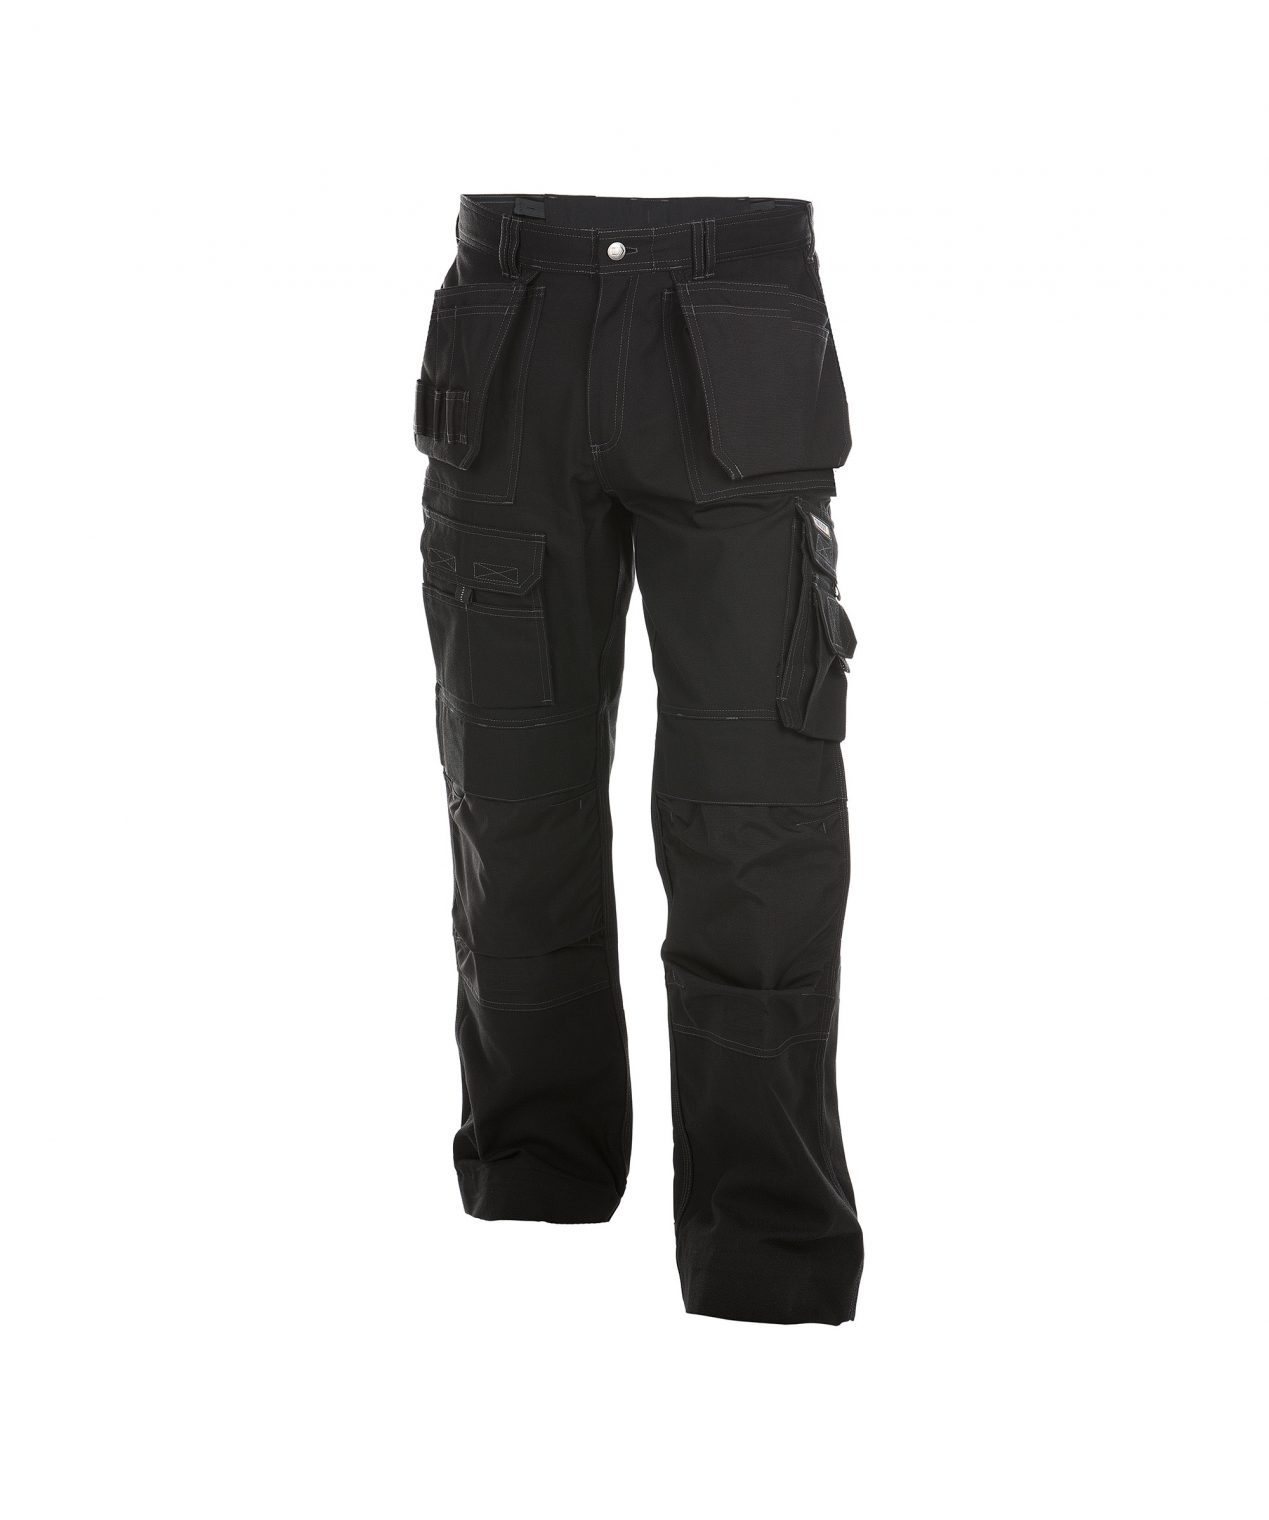 texas canvas trousers with holster pockets and knee pockets black front